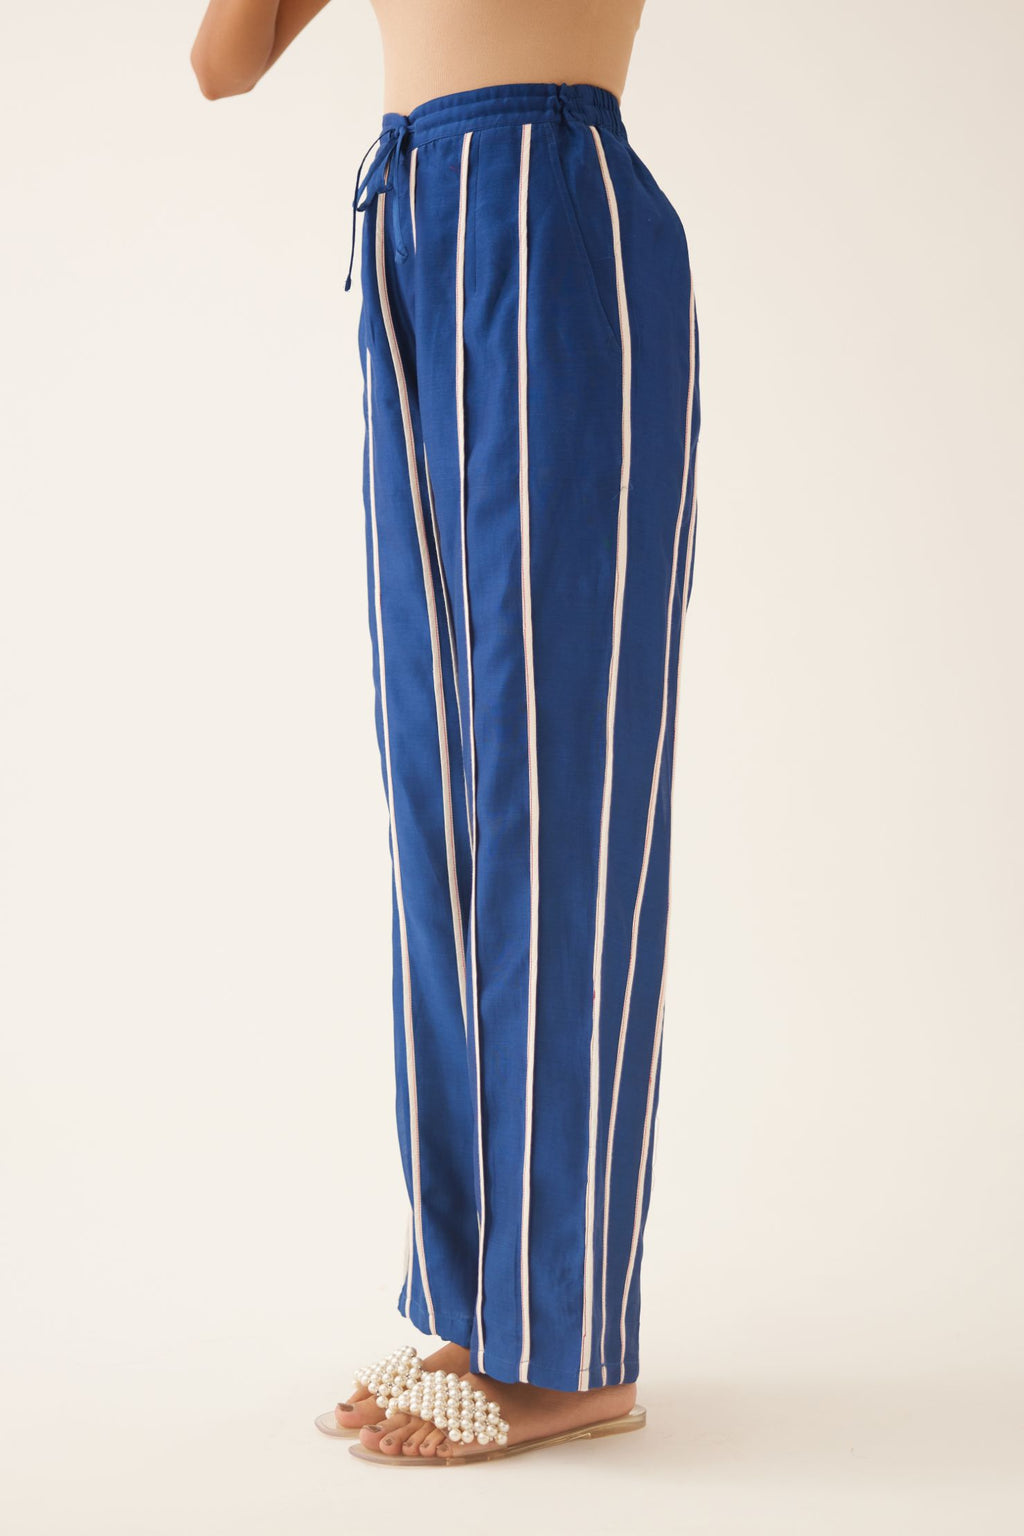 Blue silk chanderi straight pants with vertical off white piping detail.